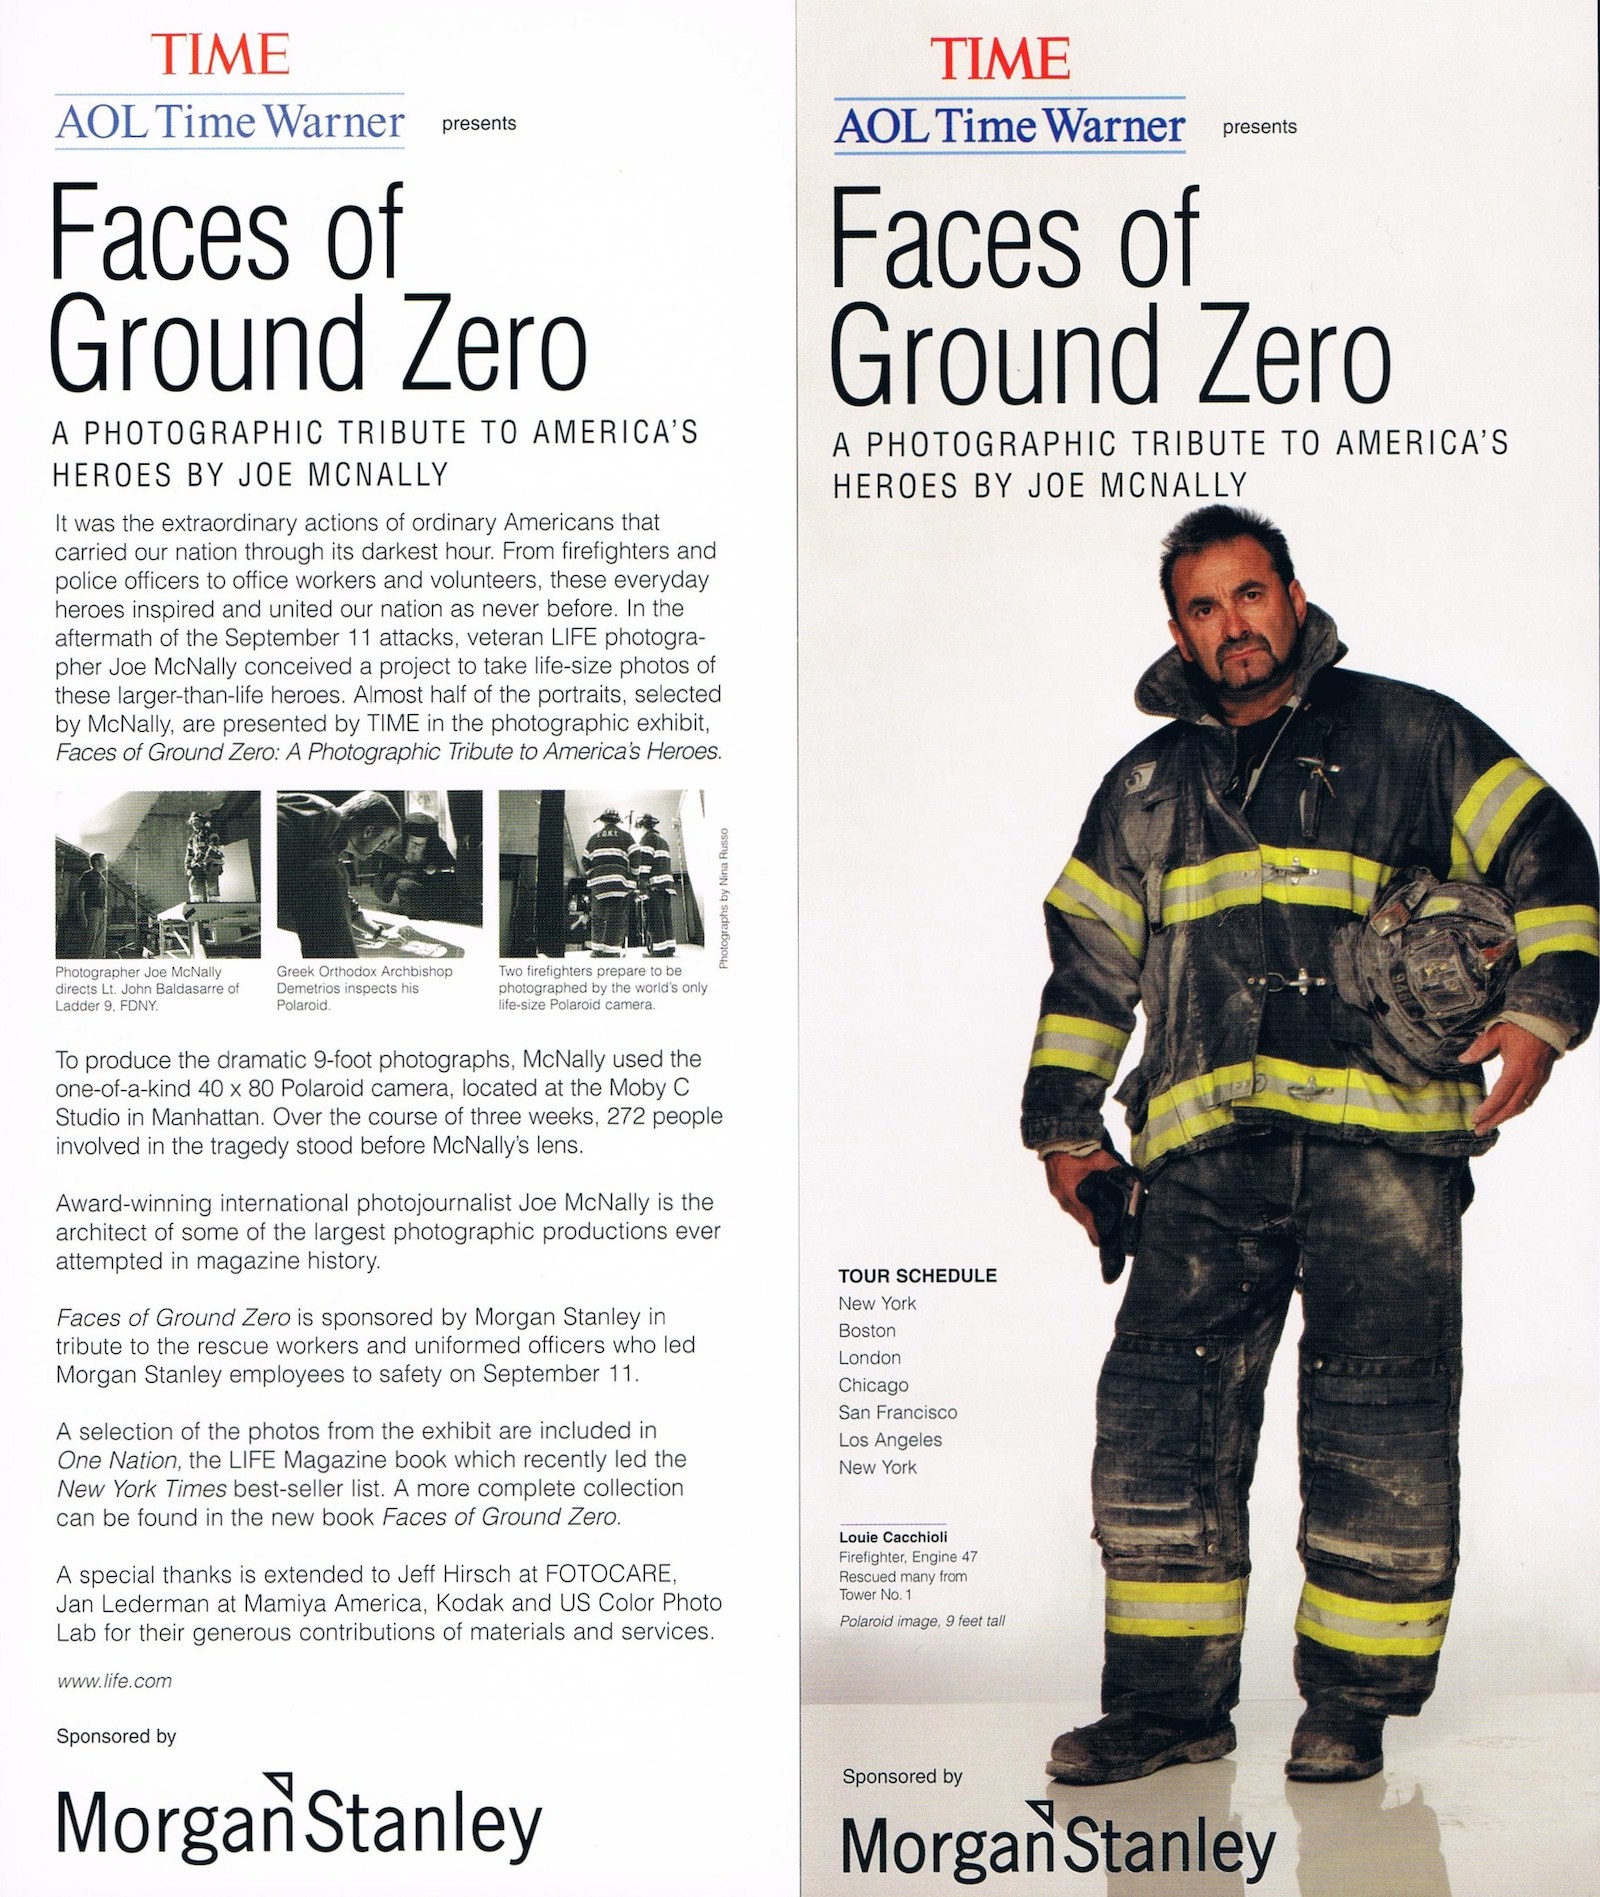 A bi-fold brochure shows a fireman holding his helmet on the left, and black ink on white paper on the left.